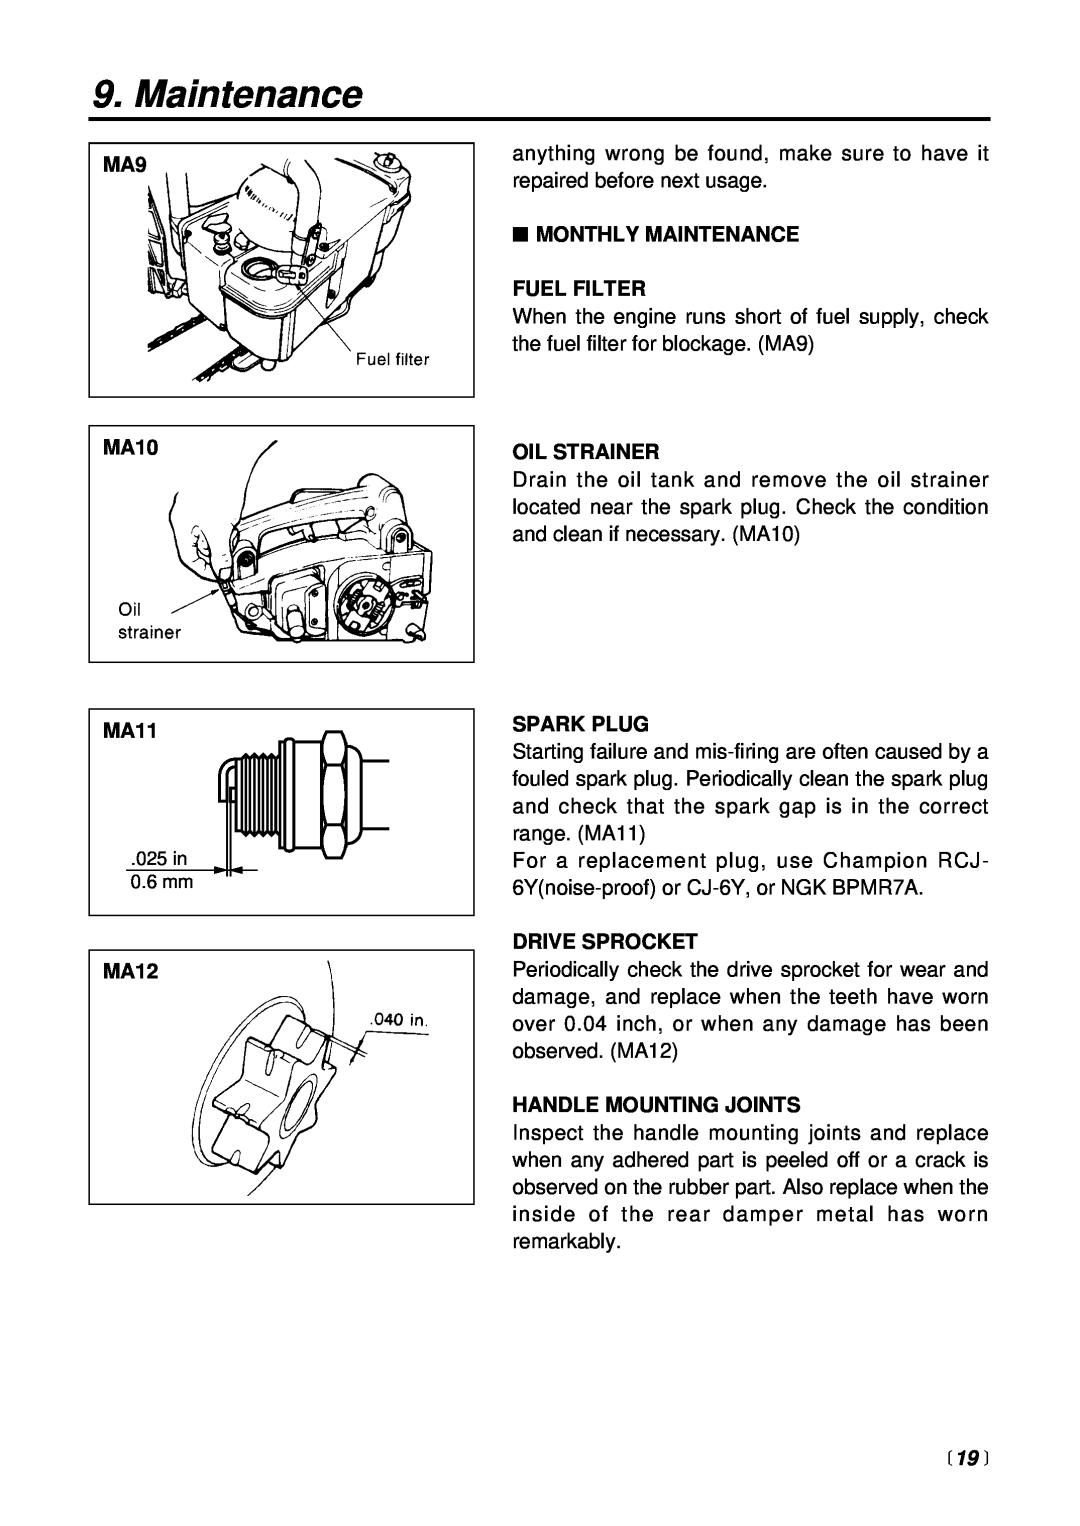 RedMax G310TS manual MA9 MA10 MA11, MA12, Monthly Maintenance Fuel Filter, Oil Strainer, Spark Plug, Drive Sprocket,  19  